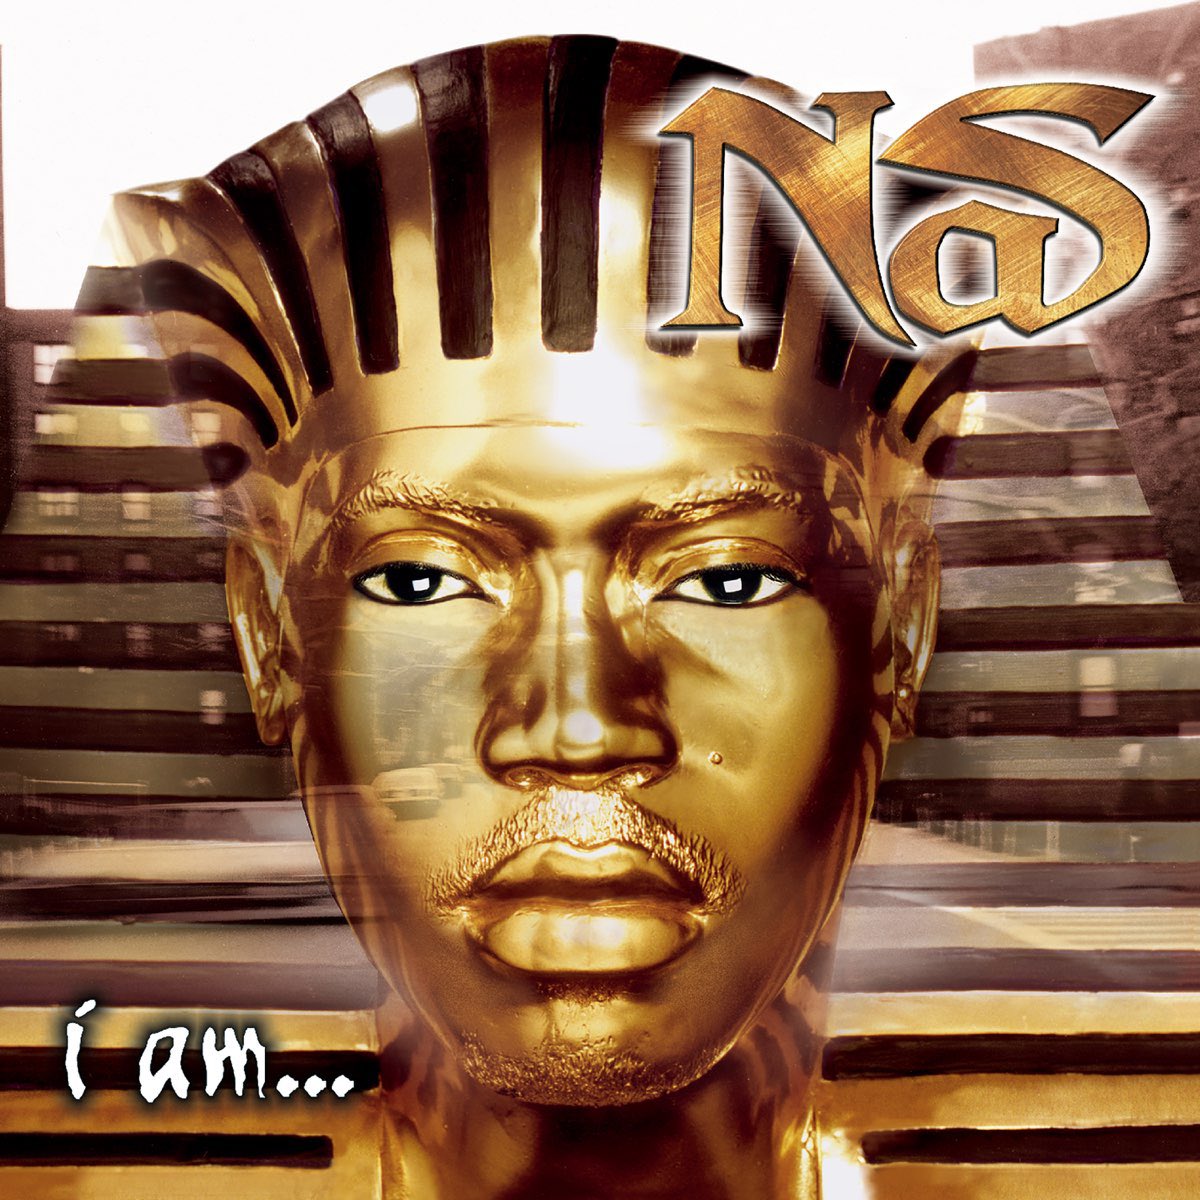 Happy 25th birthday to Nas’ third album “I Am…,” released on April 6, 1999! What song has stuck with you from this album? #Nas #IAm #IAm25 #SoulBounce